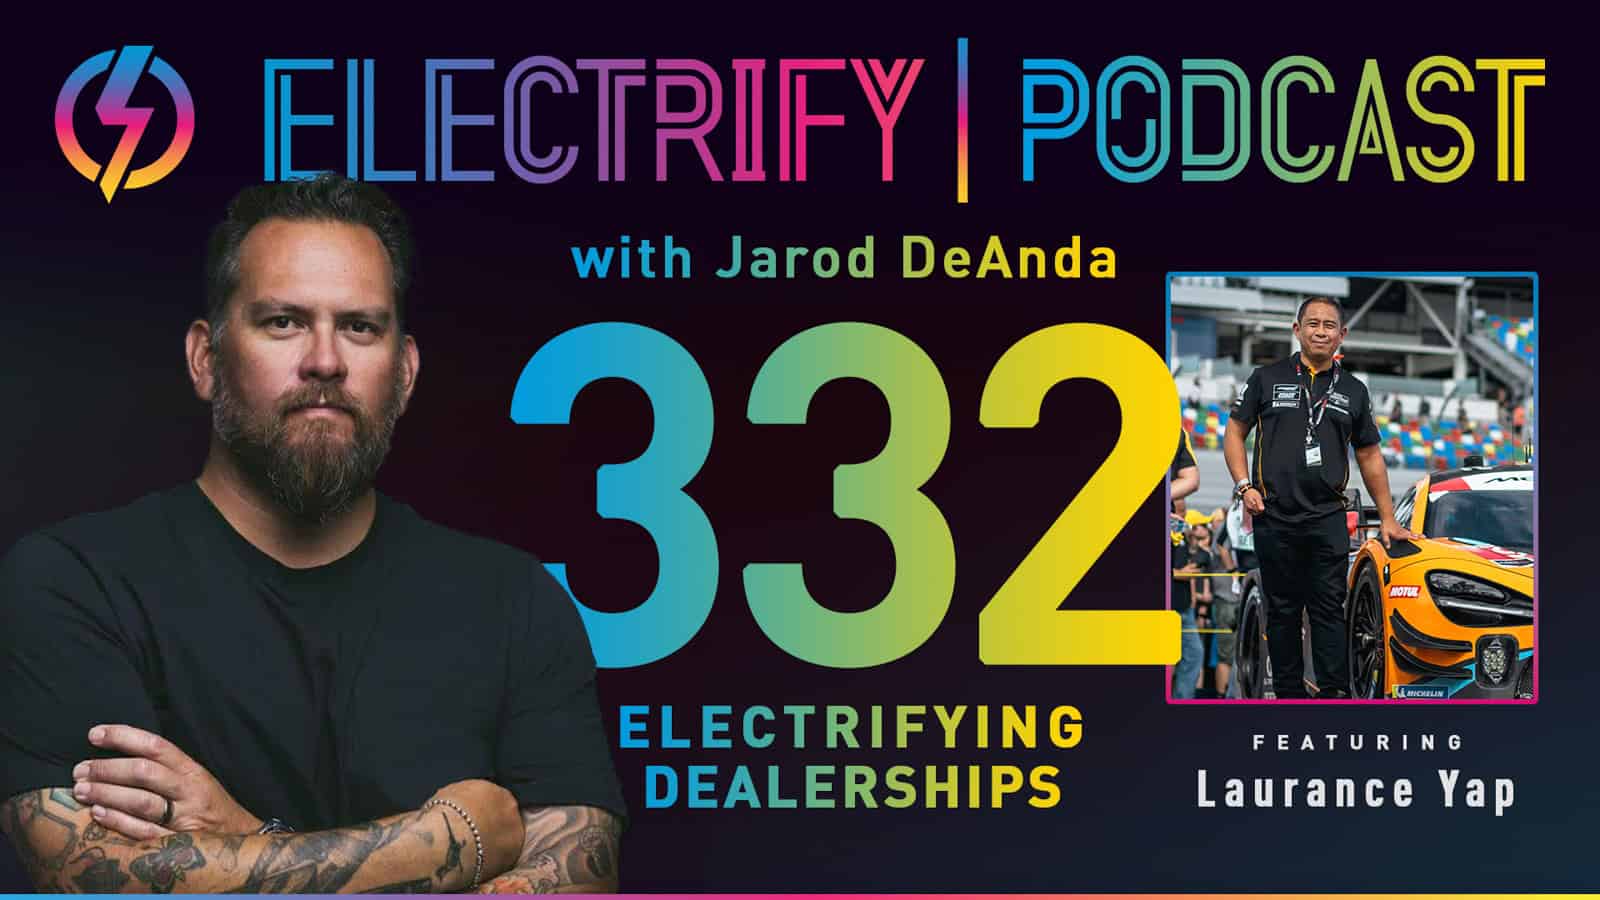 Electrify Podcast 332 with Jarod DeAnda and Laurance Yap of Lithia and Driveway LAD